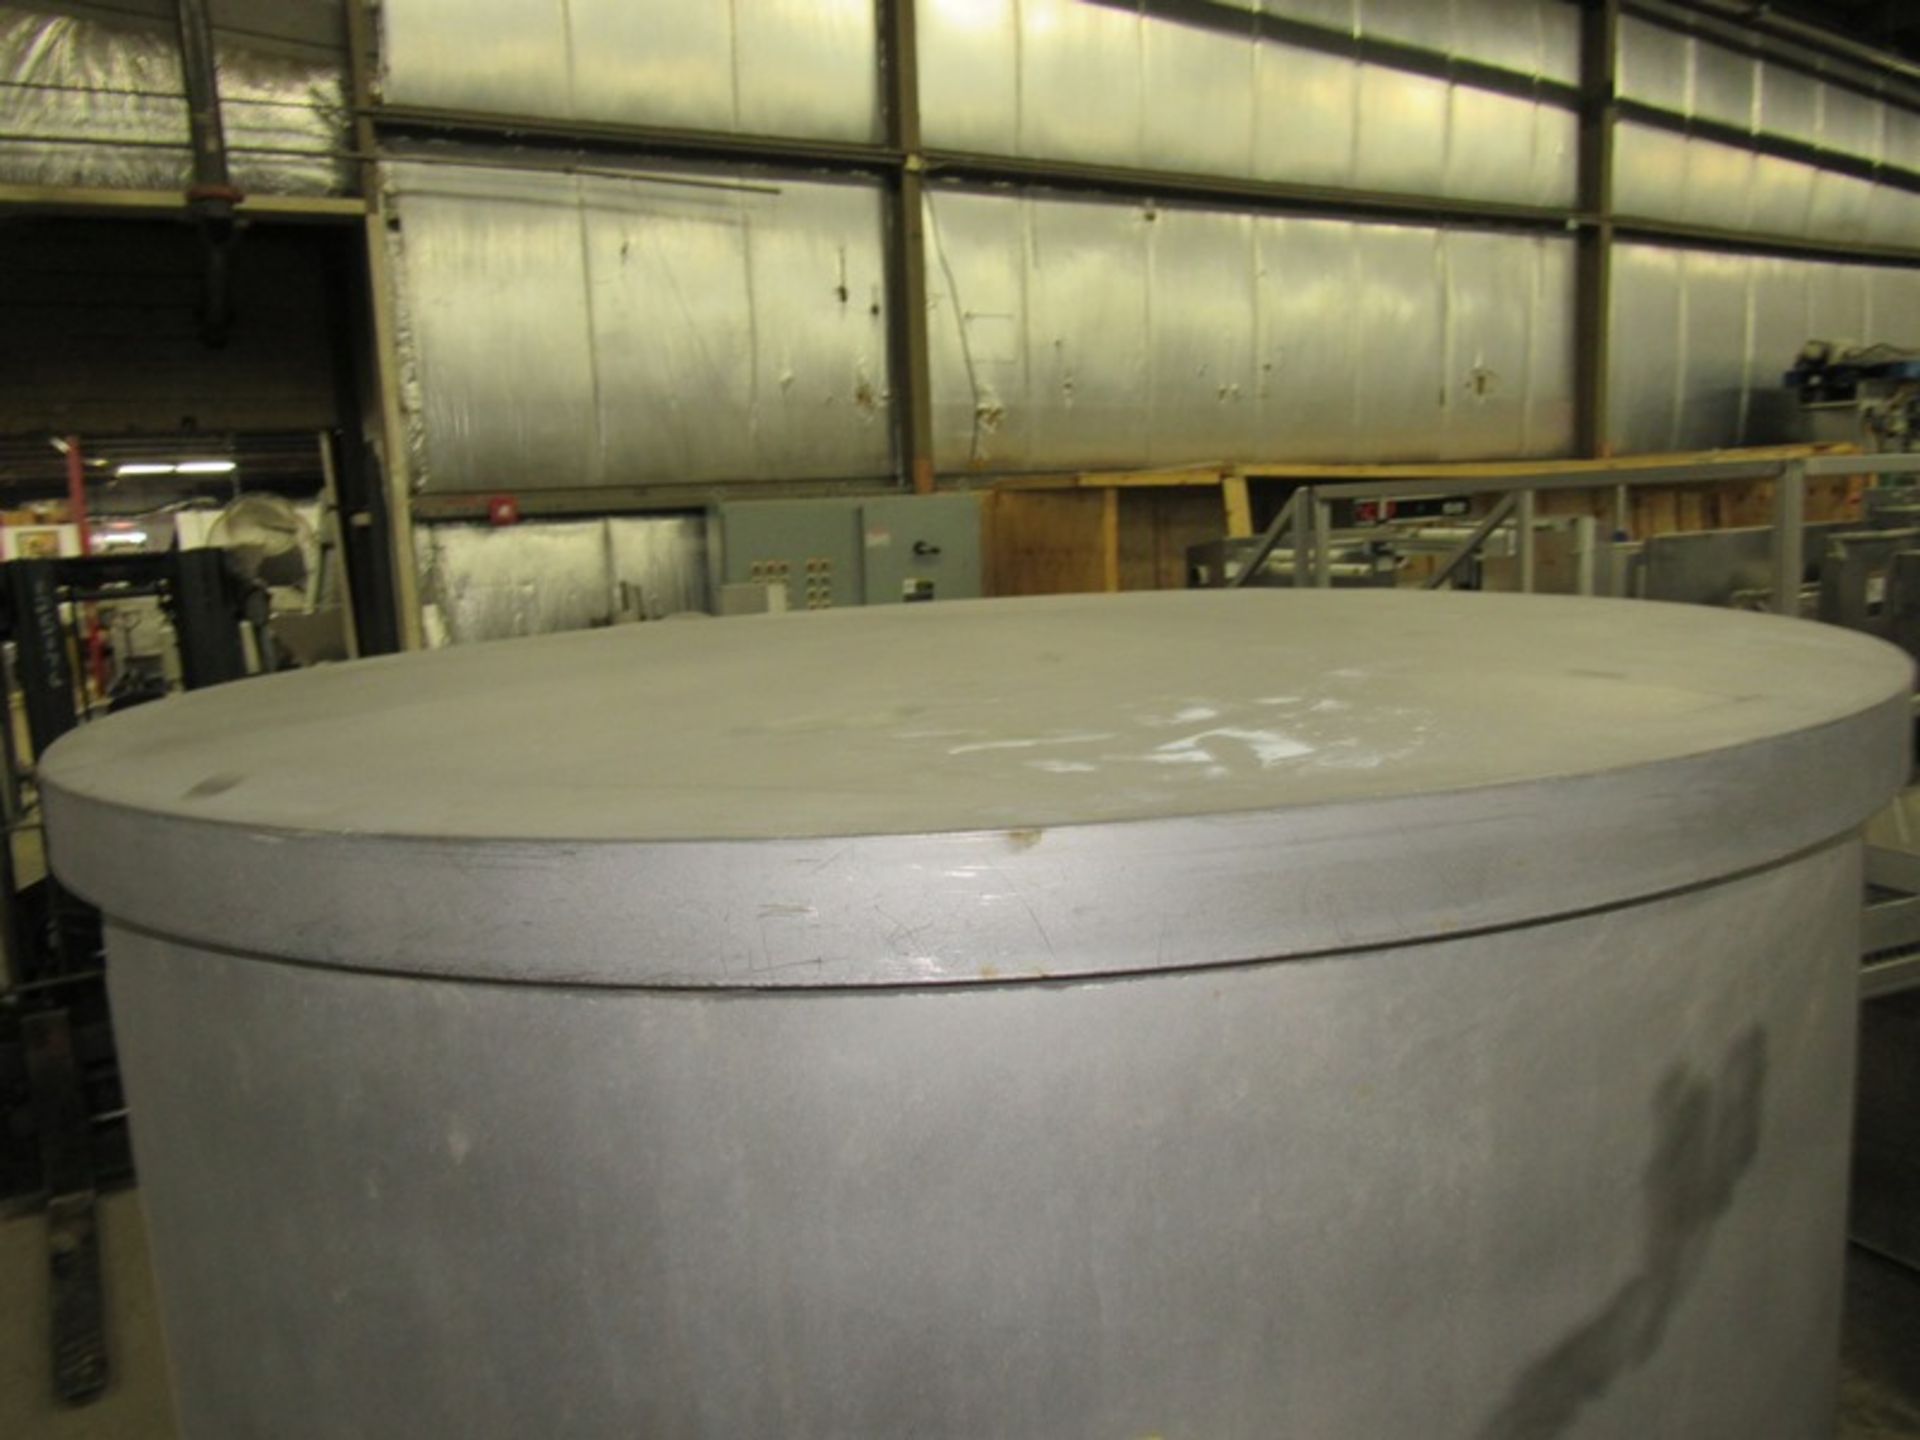 Afeco Stainless Steel Single Tank with solid lid, 44" dia. X 60" deep cone bottom, 80" tall overall, - Image 4 of 4